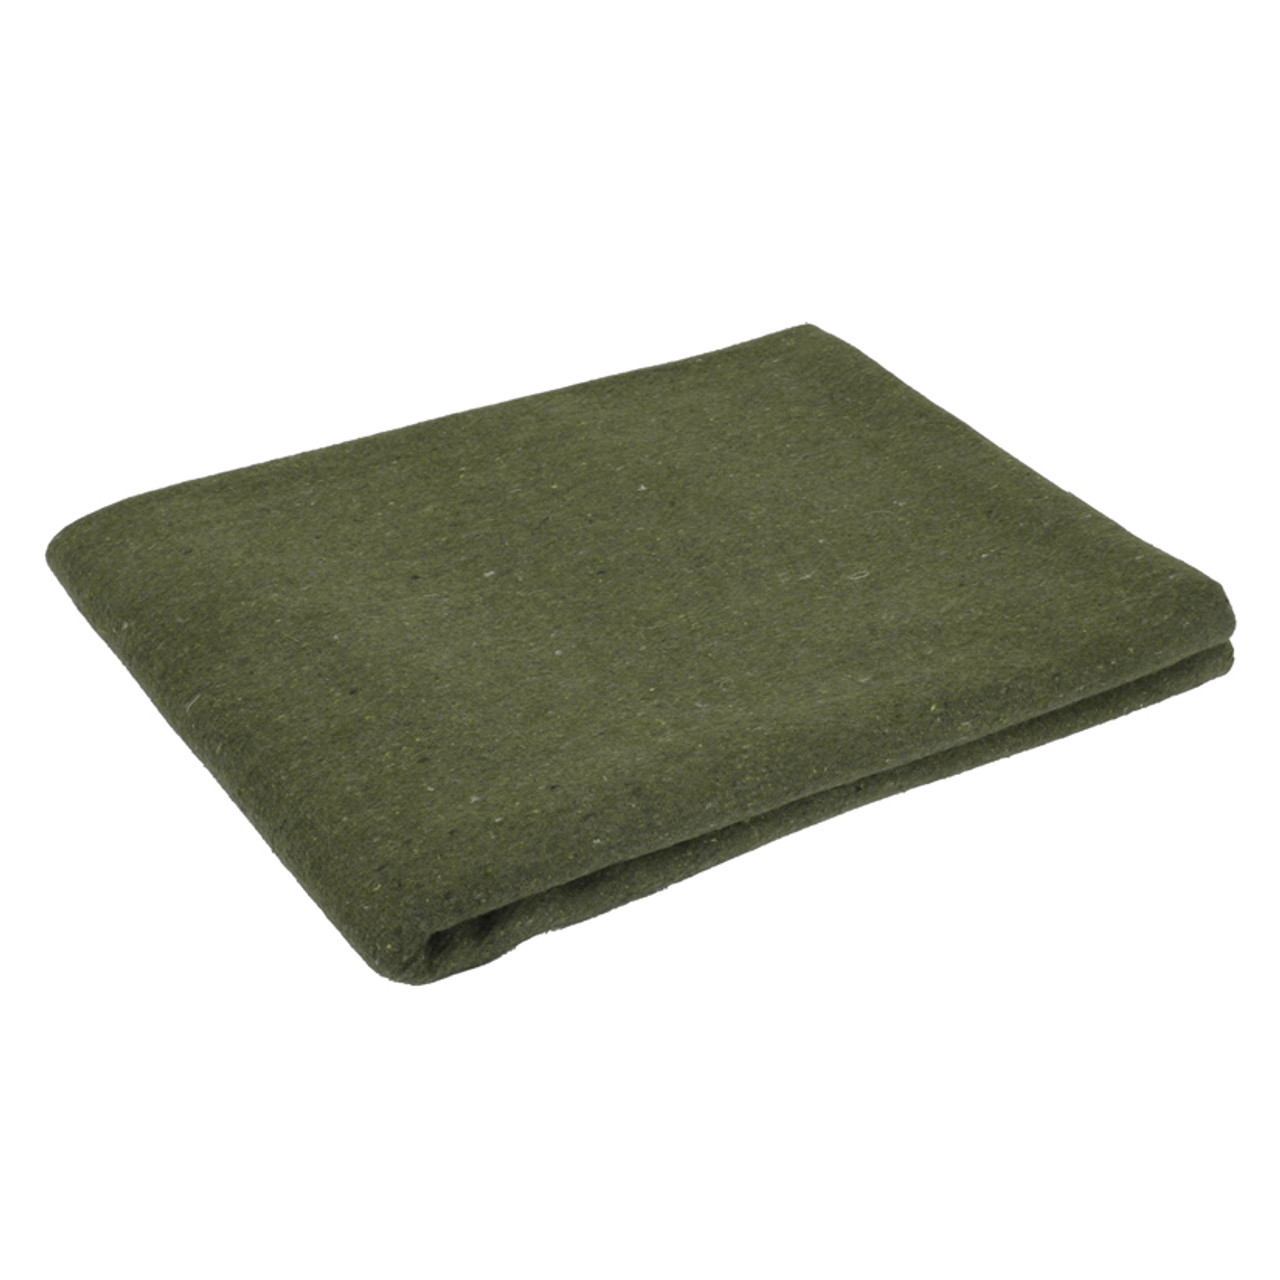 Shop Camping Survival Military Wool Blankets - Fatigues Army Navy ...